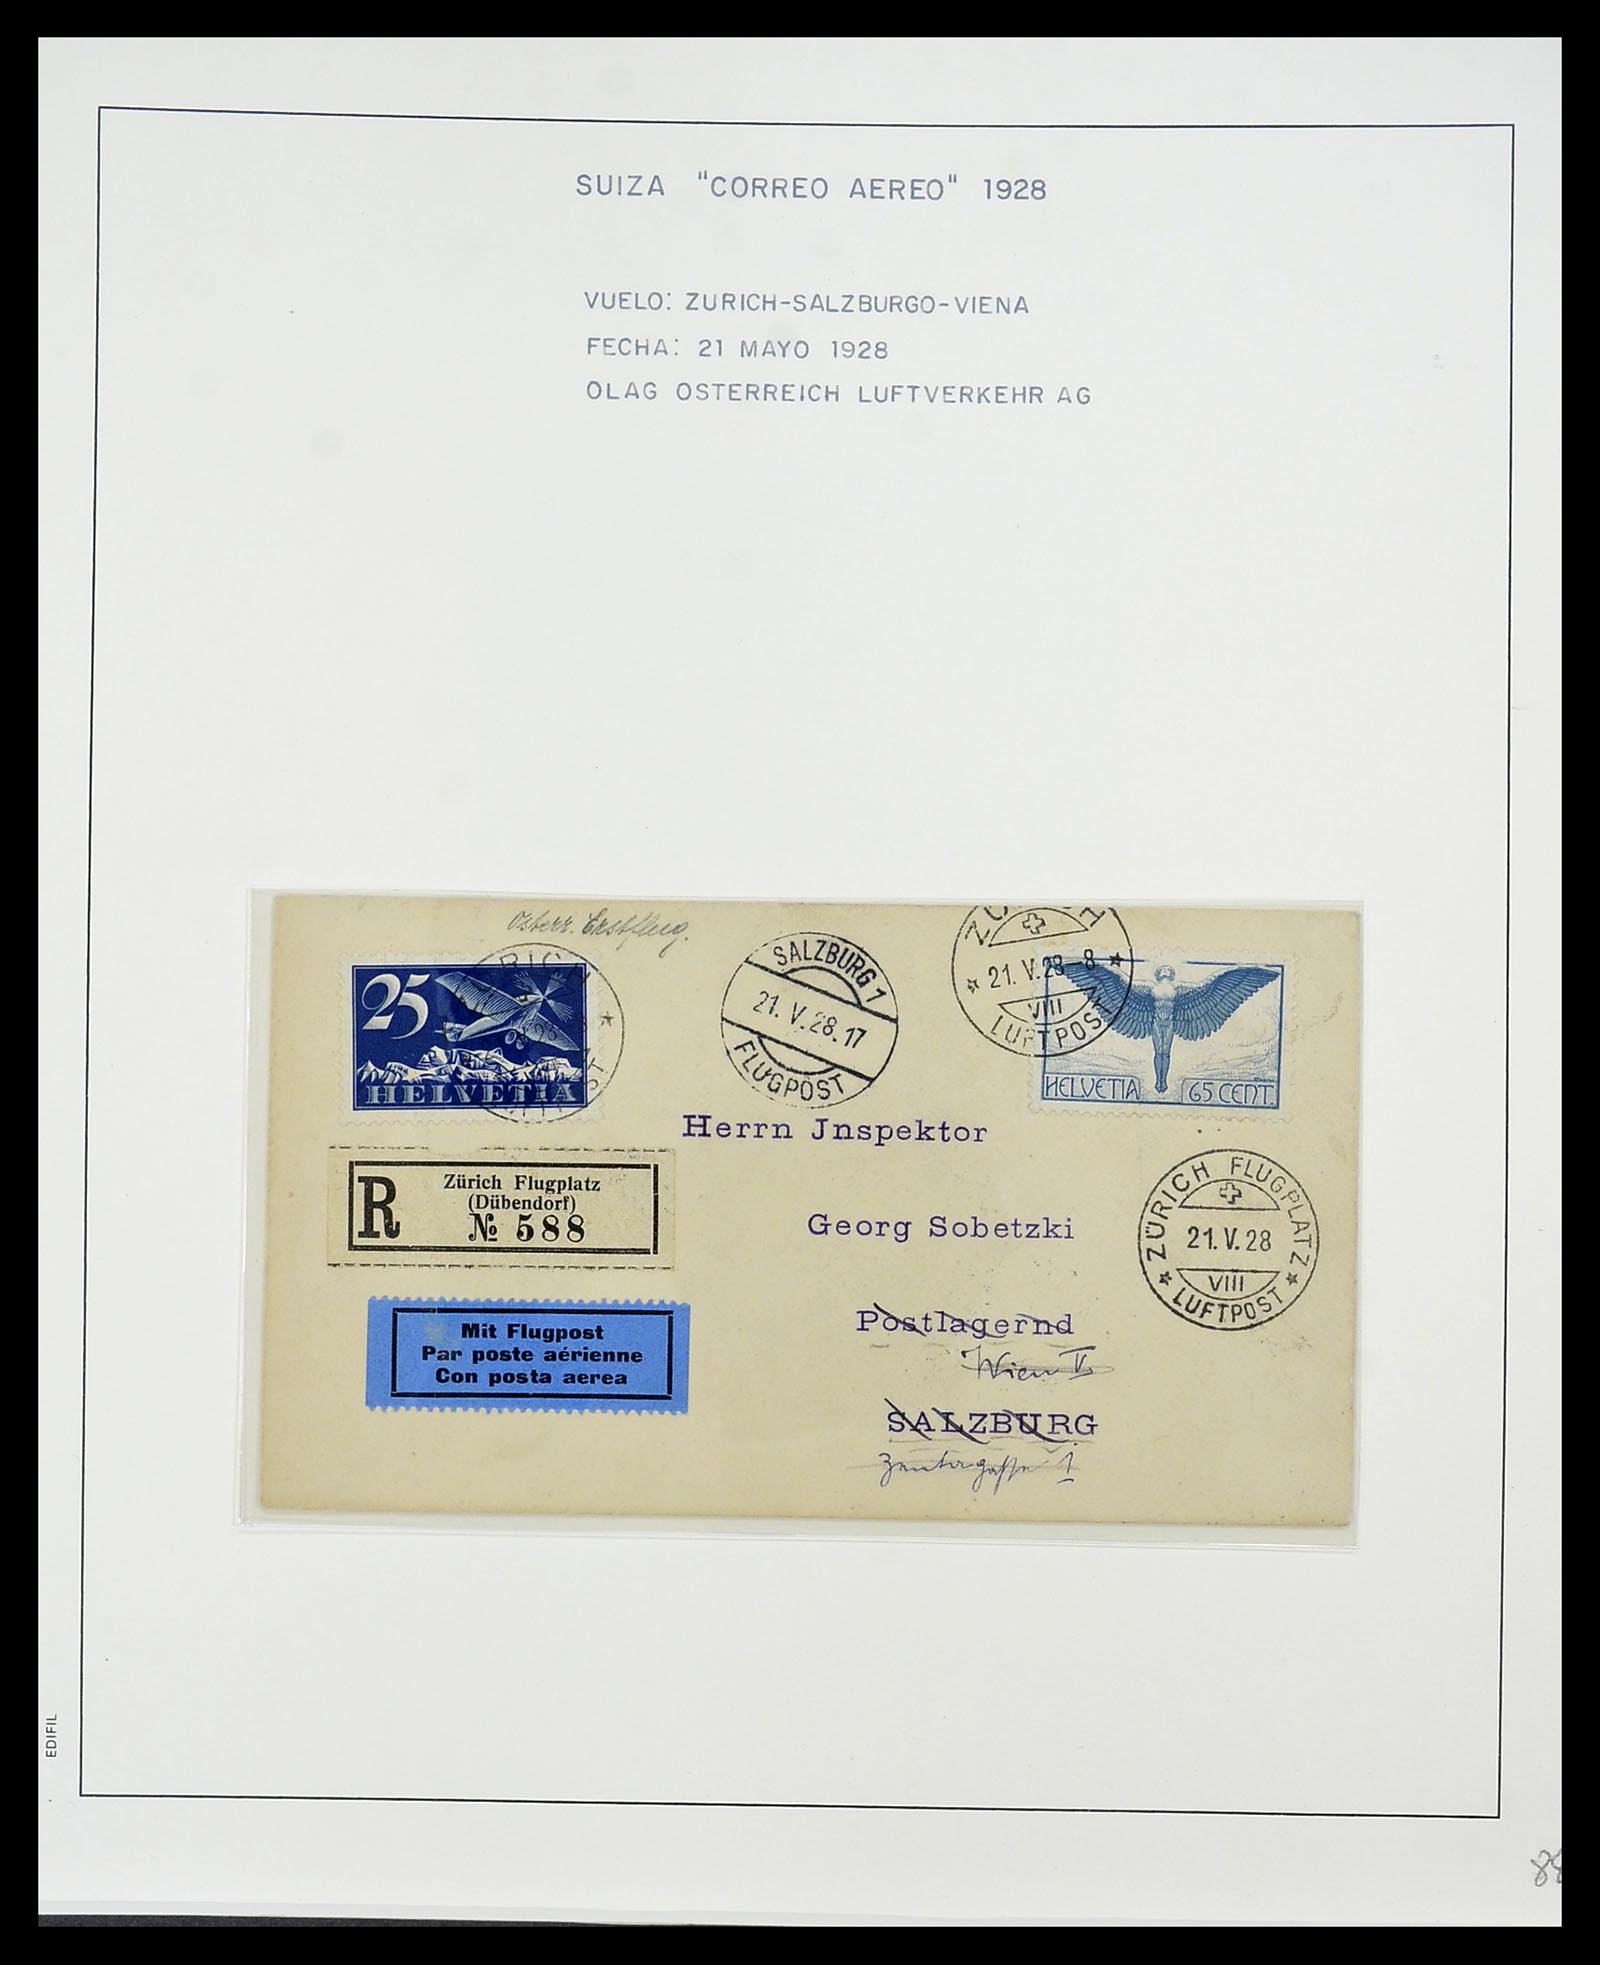 34137 016 - Stamp collection 34137 Switzerland airmail covers 1923-1963.